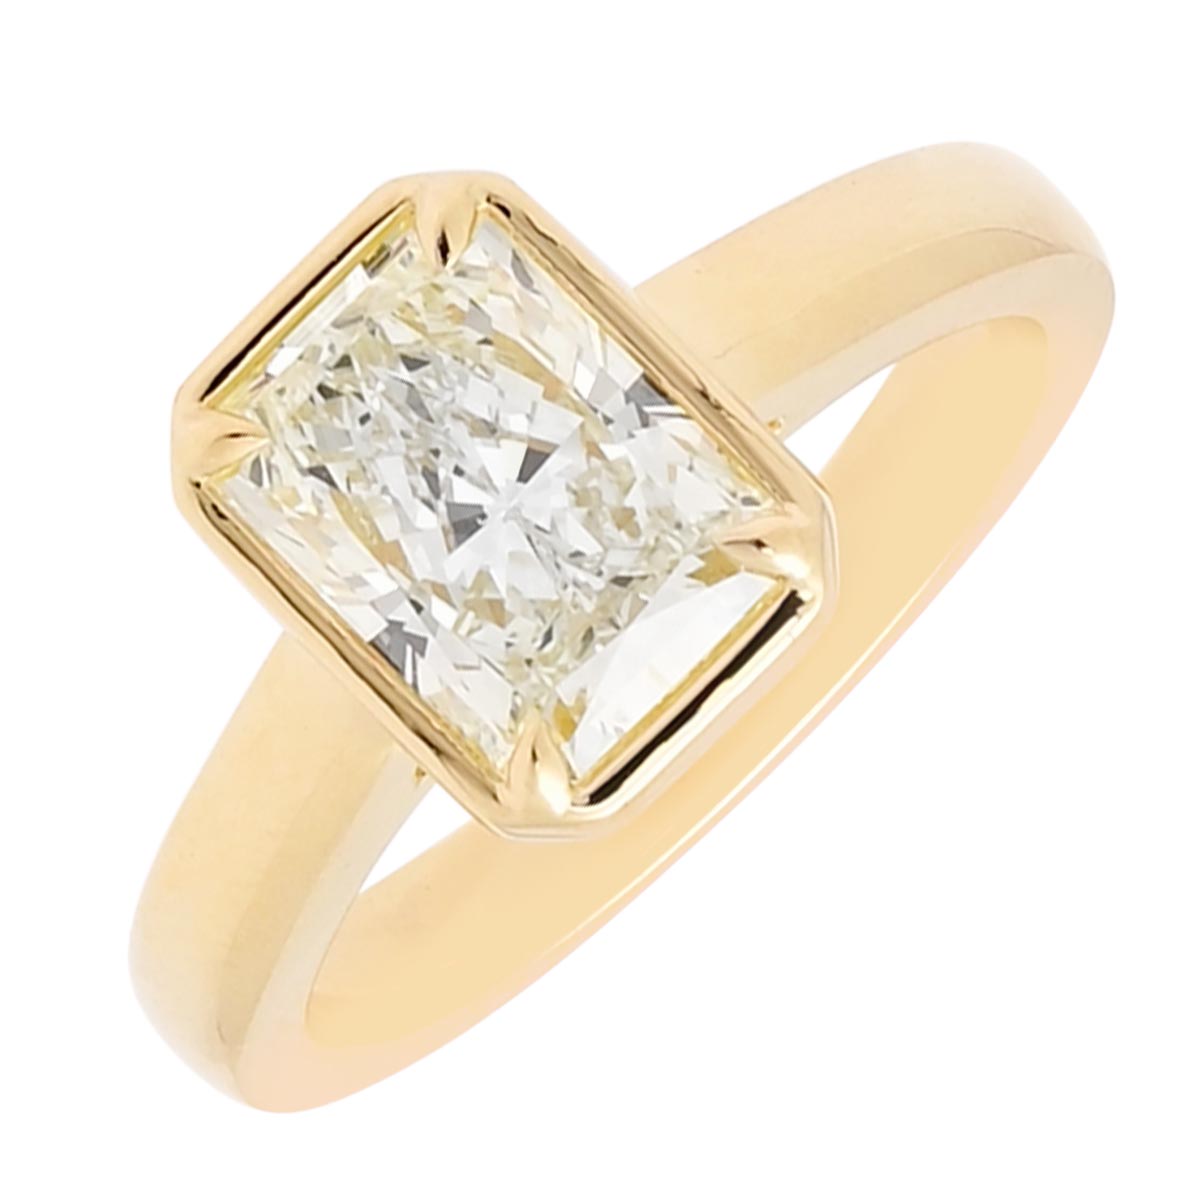 Radiant Cut Diamond Bezel Engagement Ring in 14kt Yellow Gold (2ct)